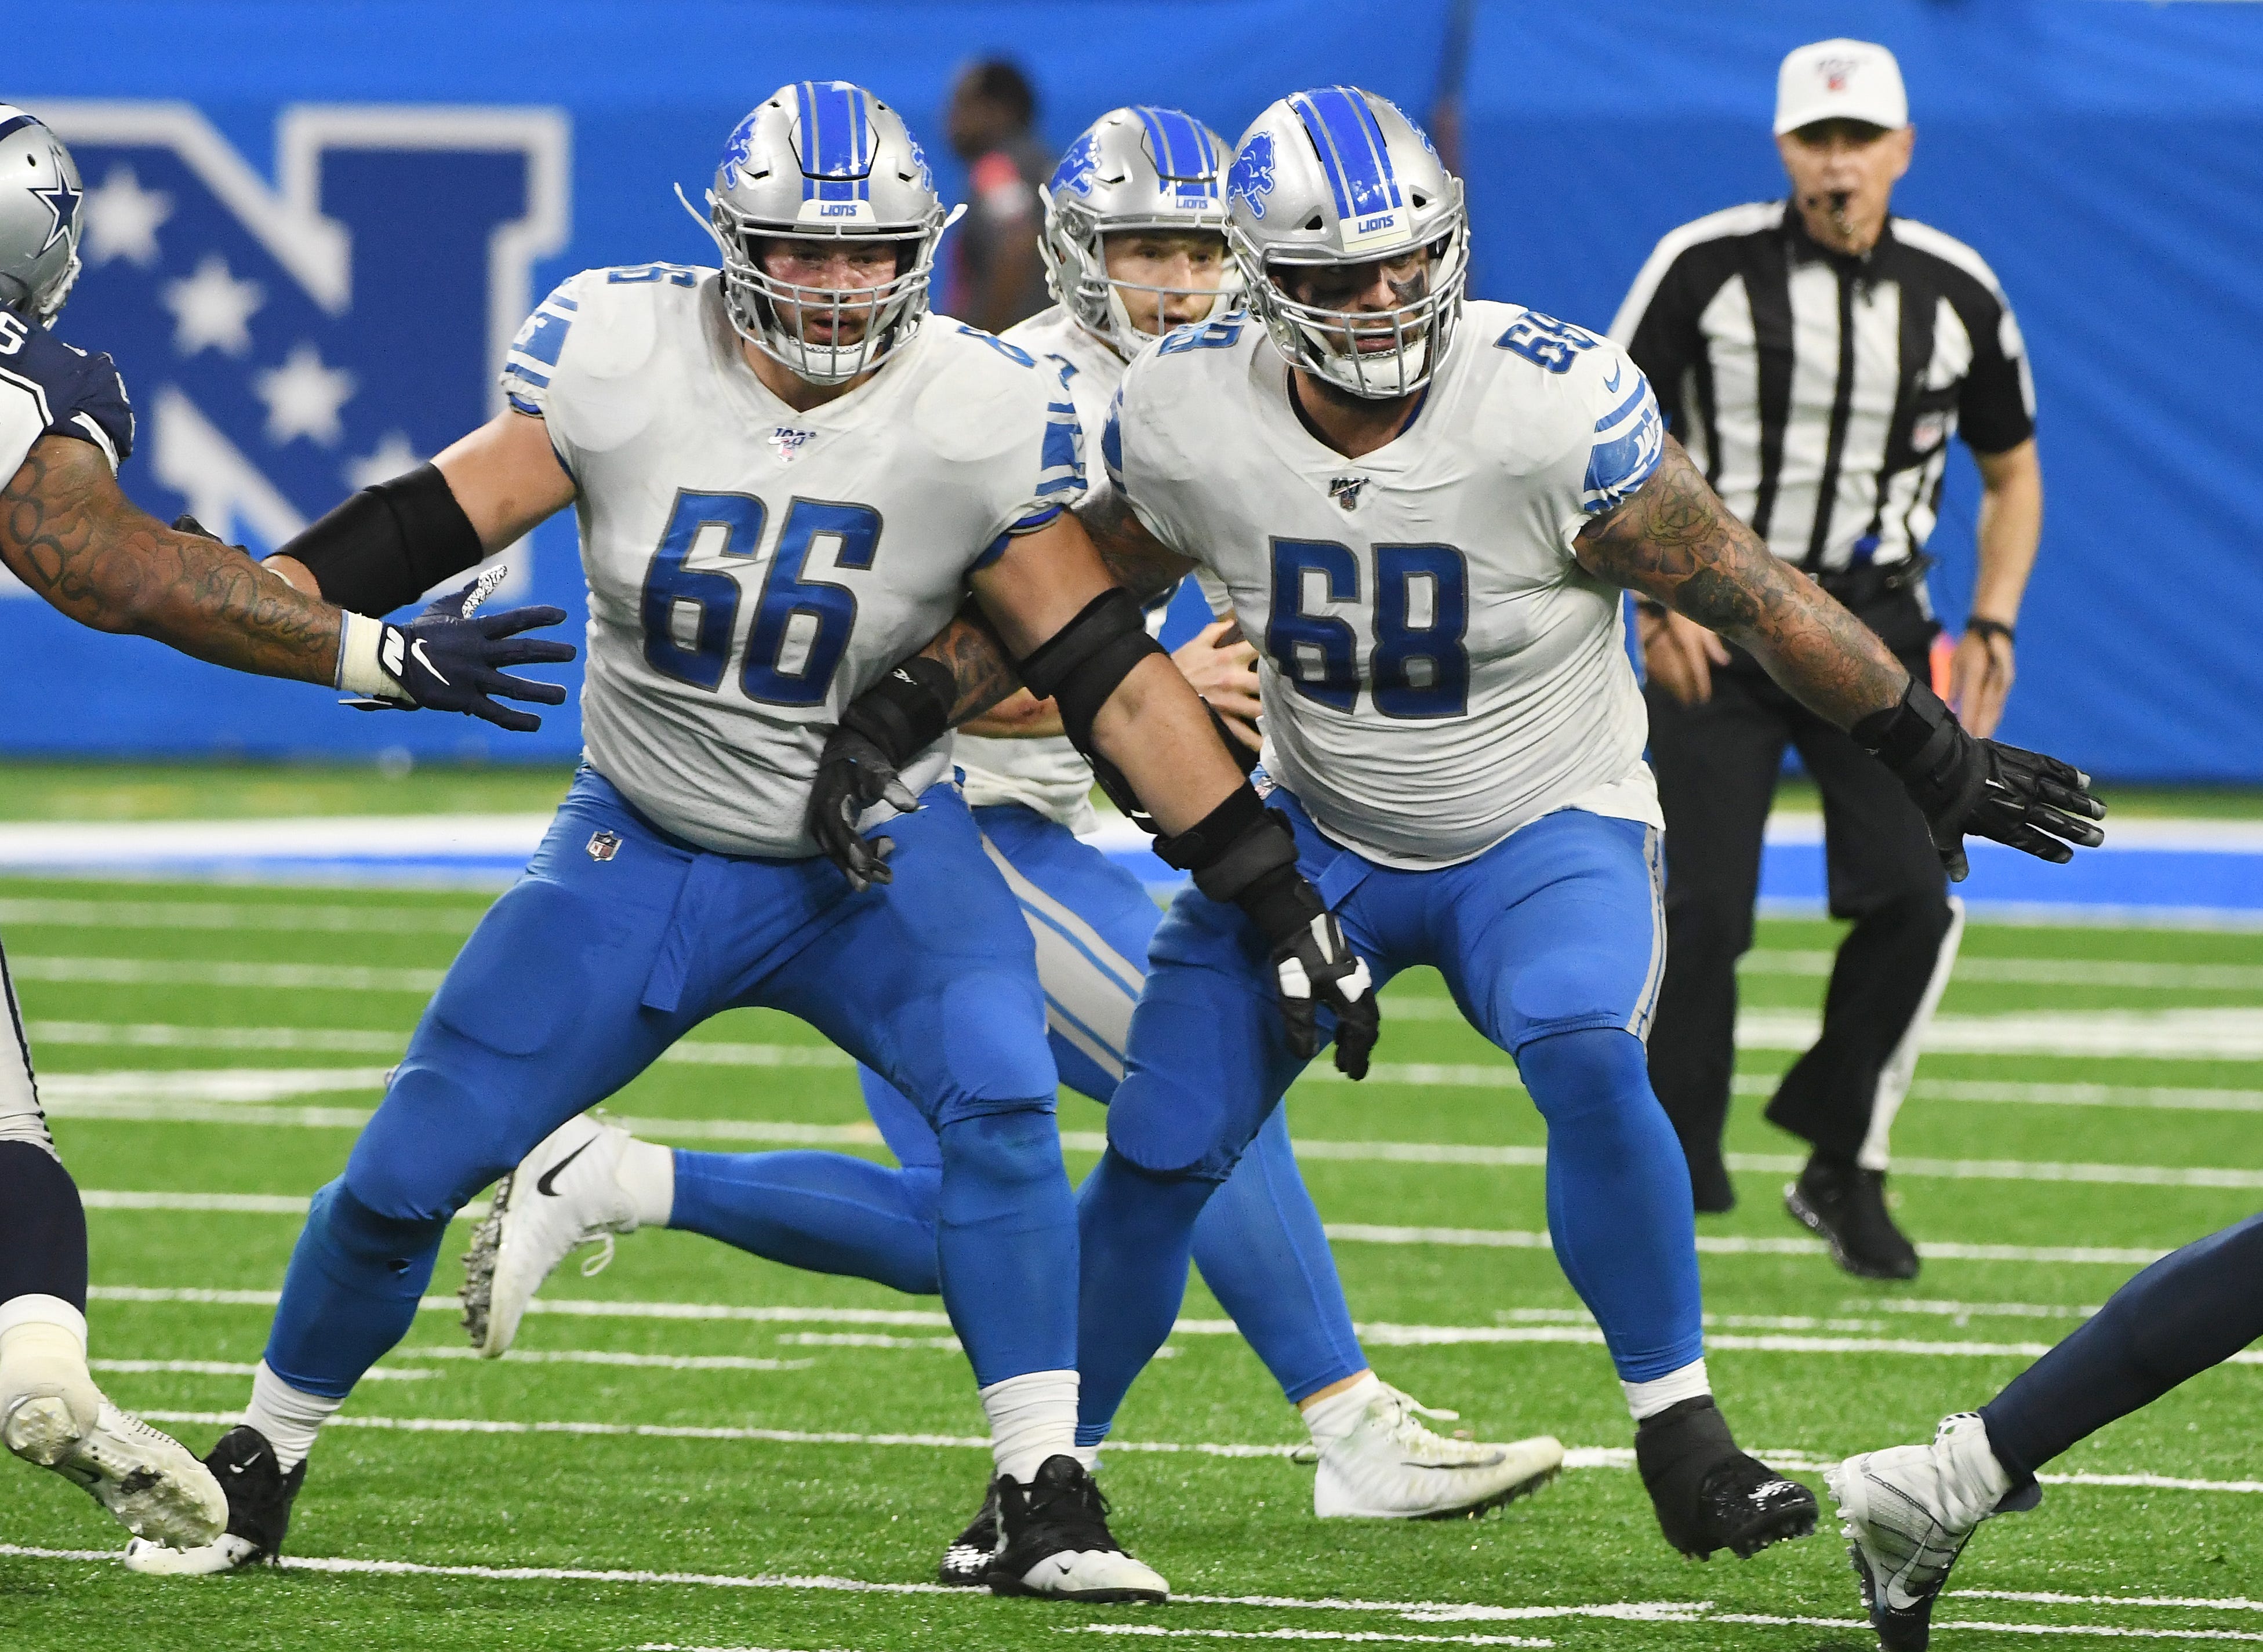 Joe Dahl, guard: One of the best values on the roster, Dahl (66) provided an adequate starting performance for a little more than $1 million. Despite adding weight and strength in his push for a bigger role, Dahl remained a better pass protector than run blocker. Grade: C+